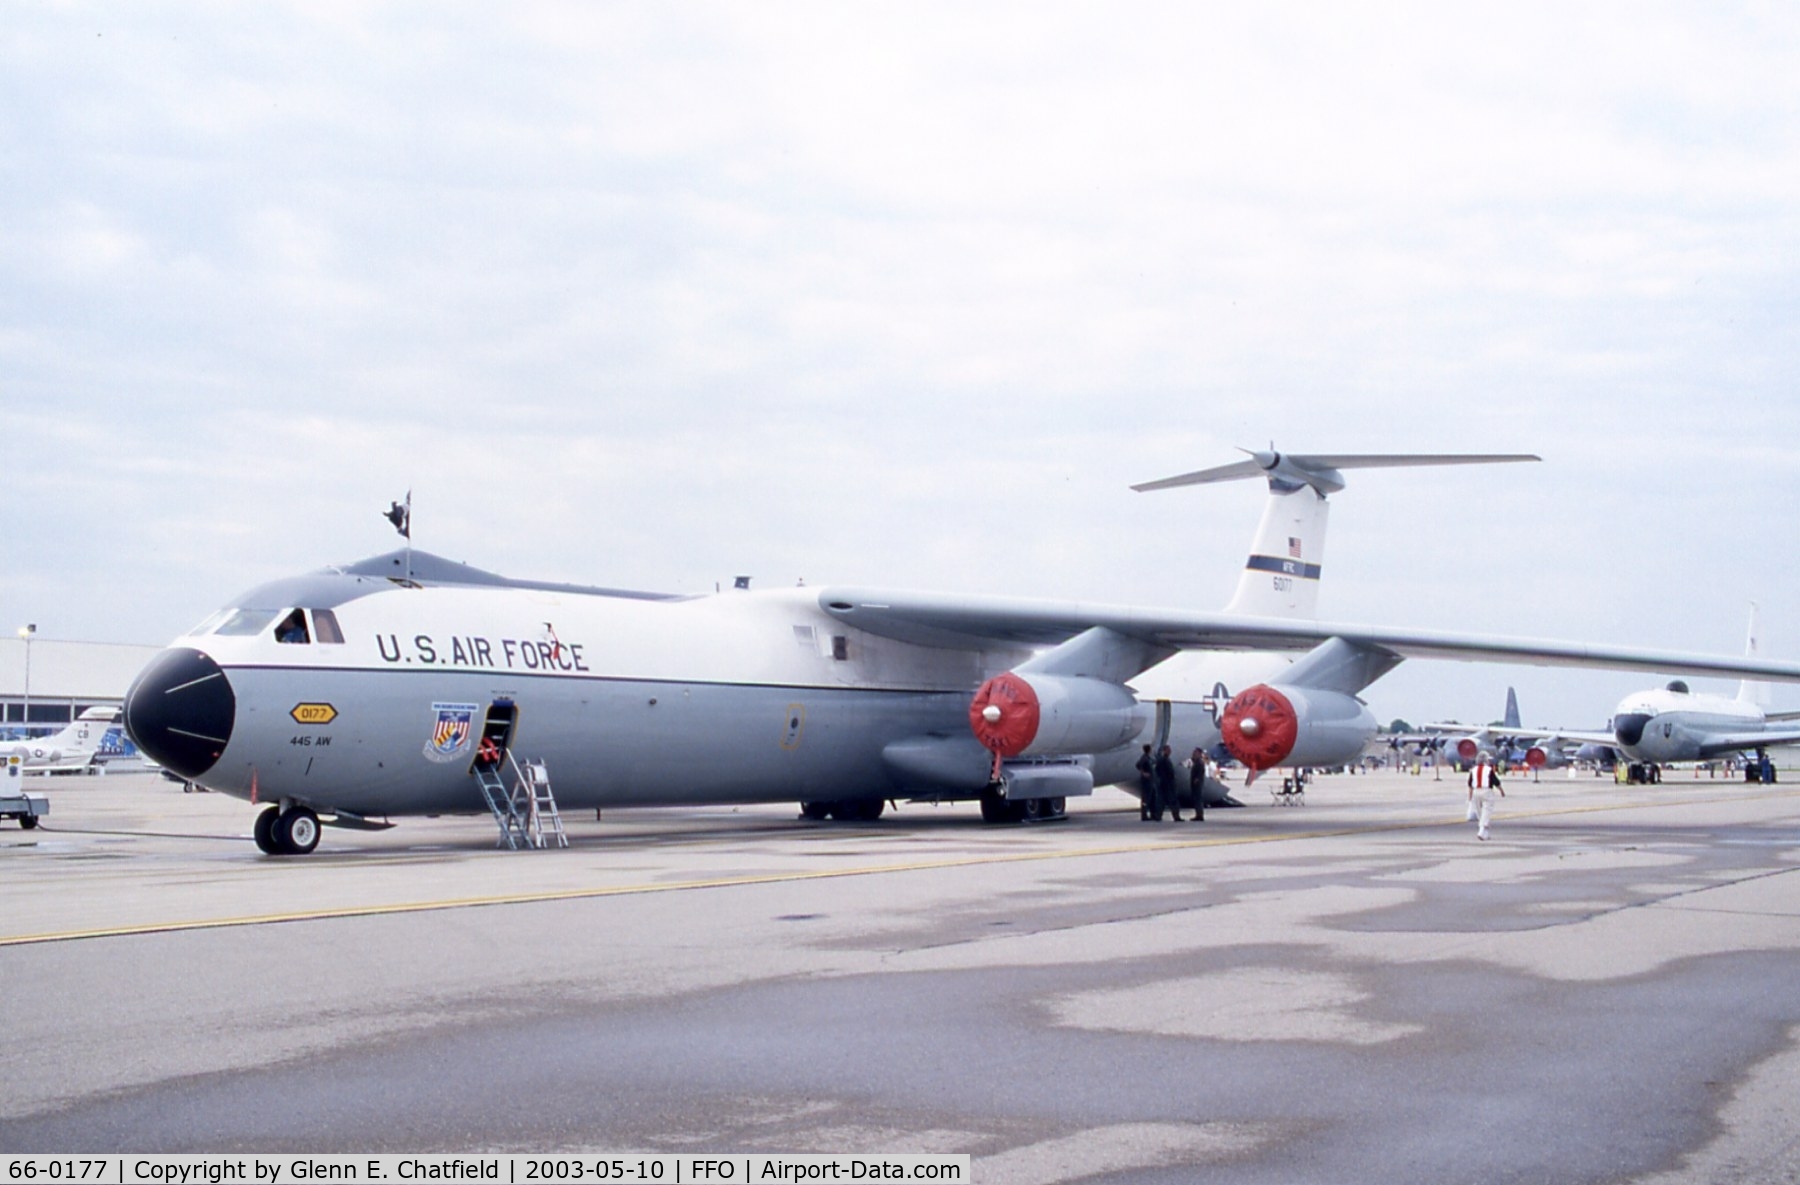 66-0177, 1966 Lockheed C-141C-LM Starlifter C/N 300-6203, C-141B that brought home Vietnam POWs, flown in for the 100th Anniversary of Flight celebration prior to being flown to the Air Force Museum